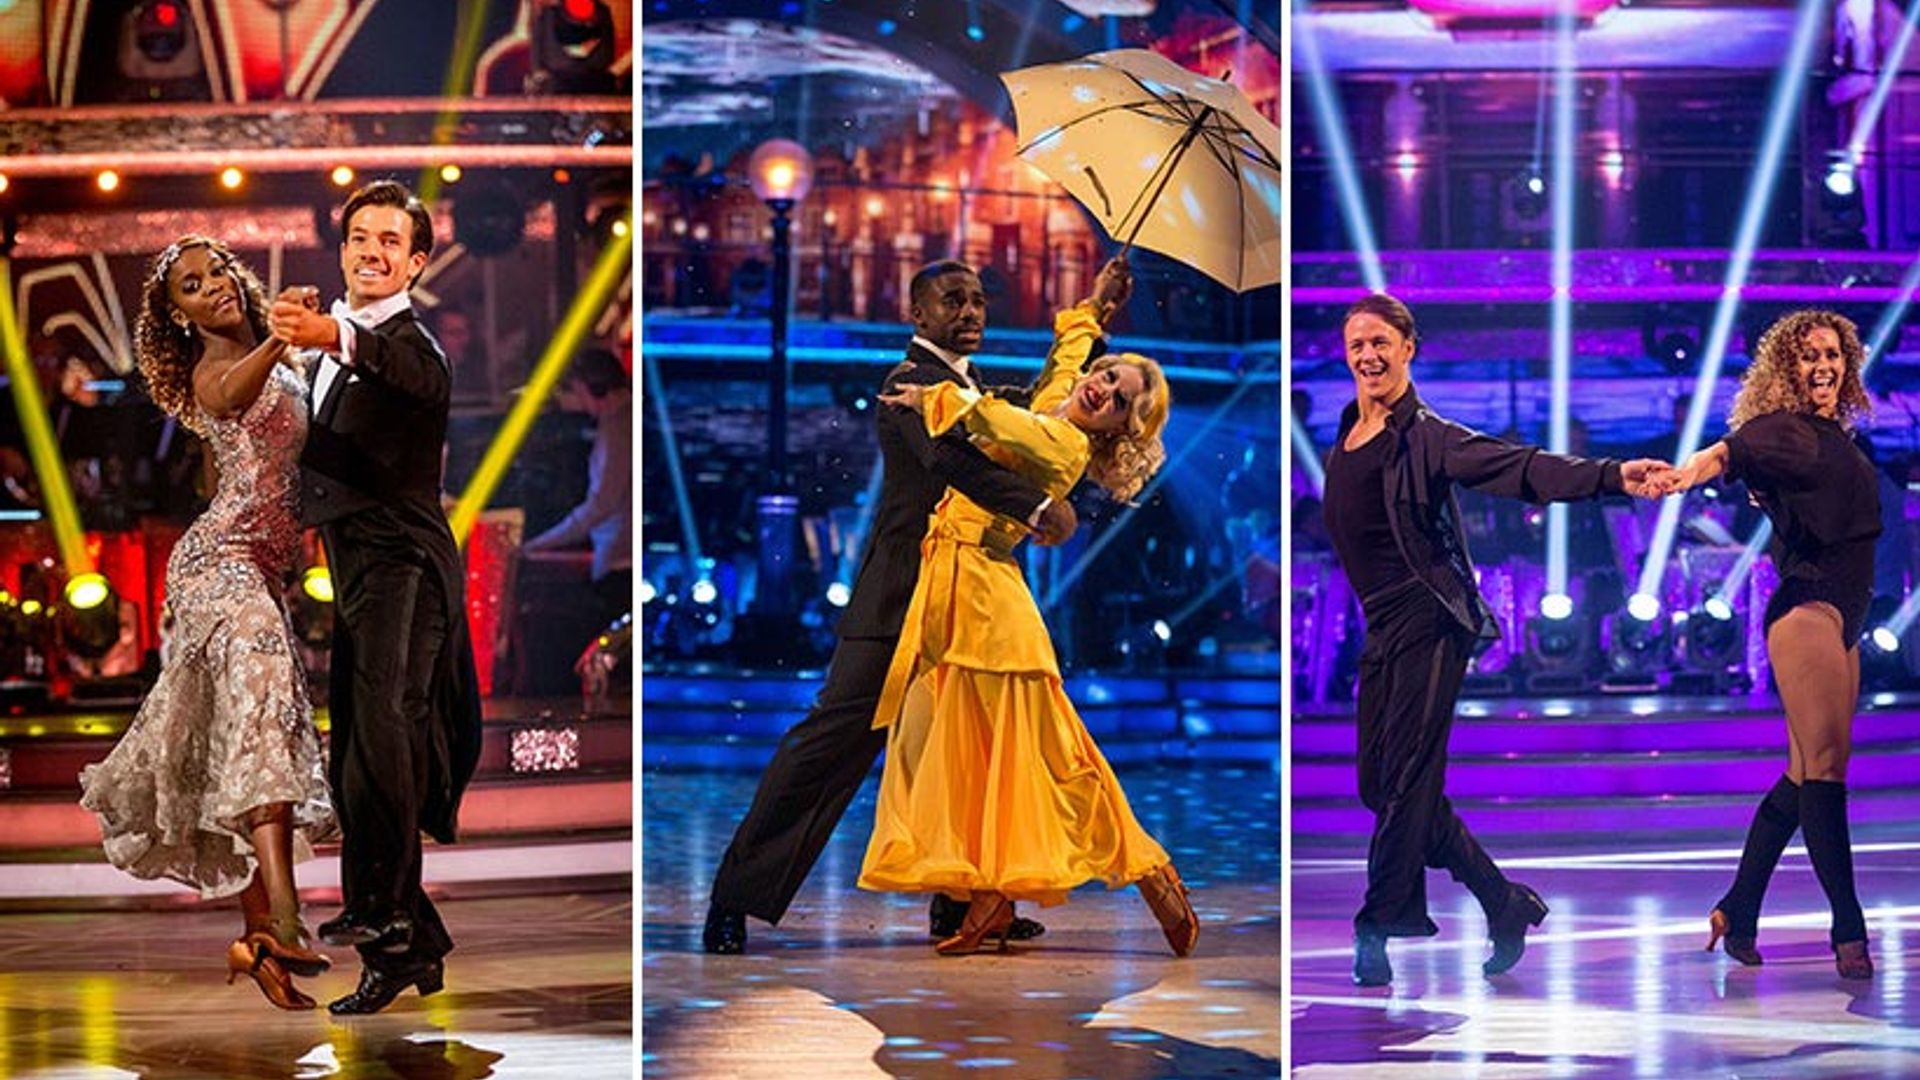 Strictly Come Dancing 2016 winner revealed! Find out who took home the Glitterball trophy